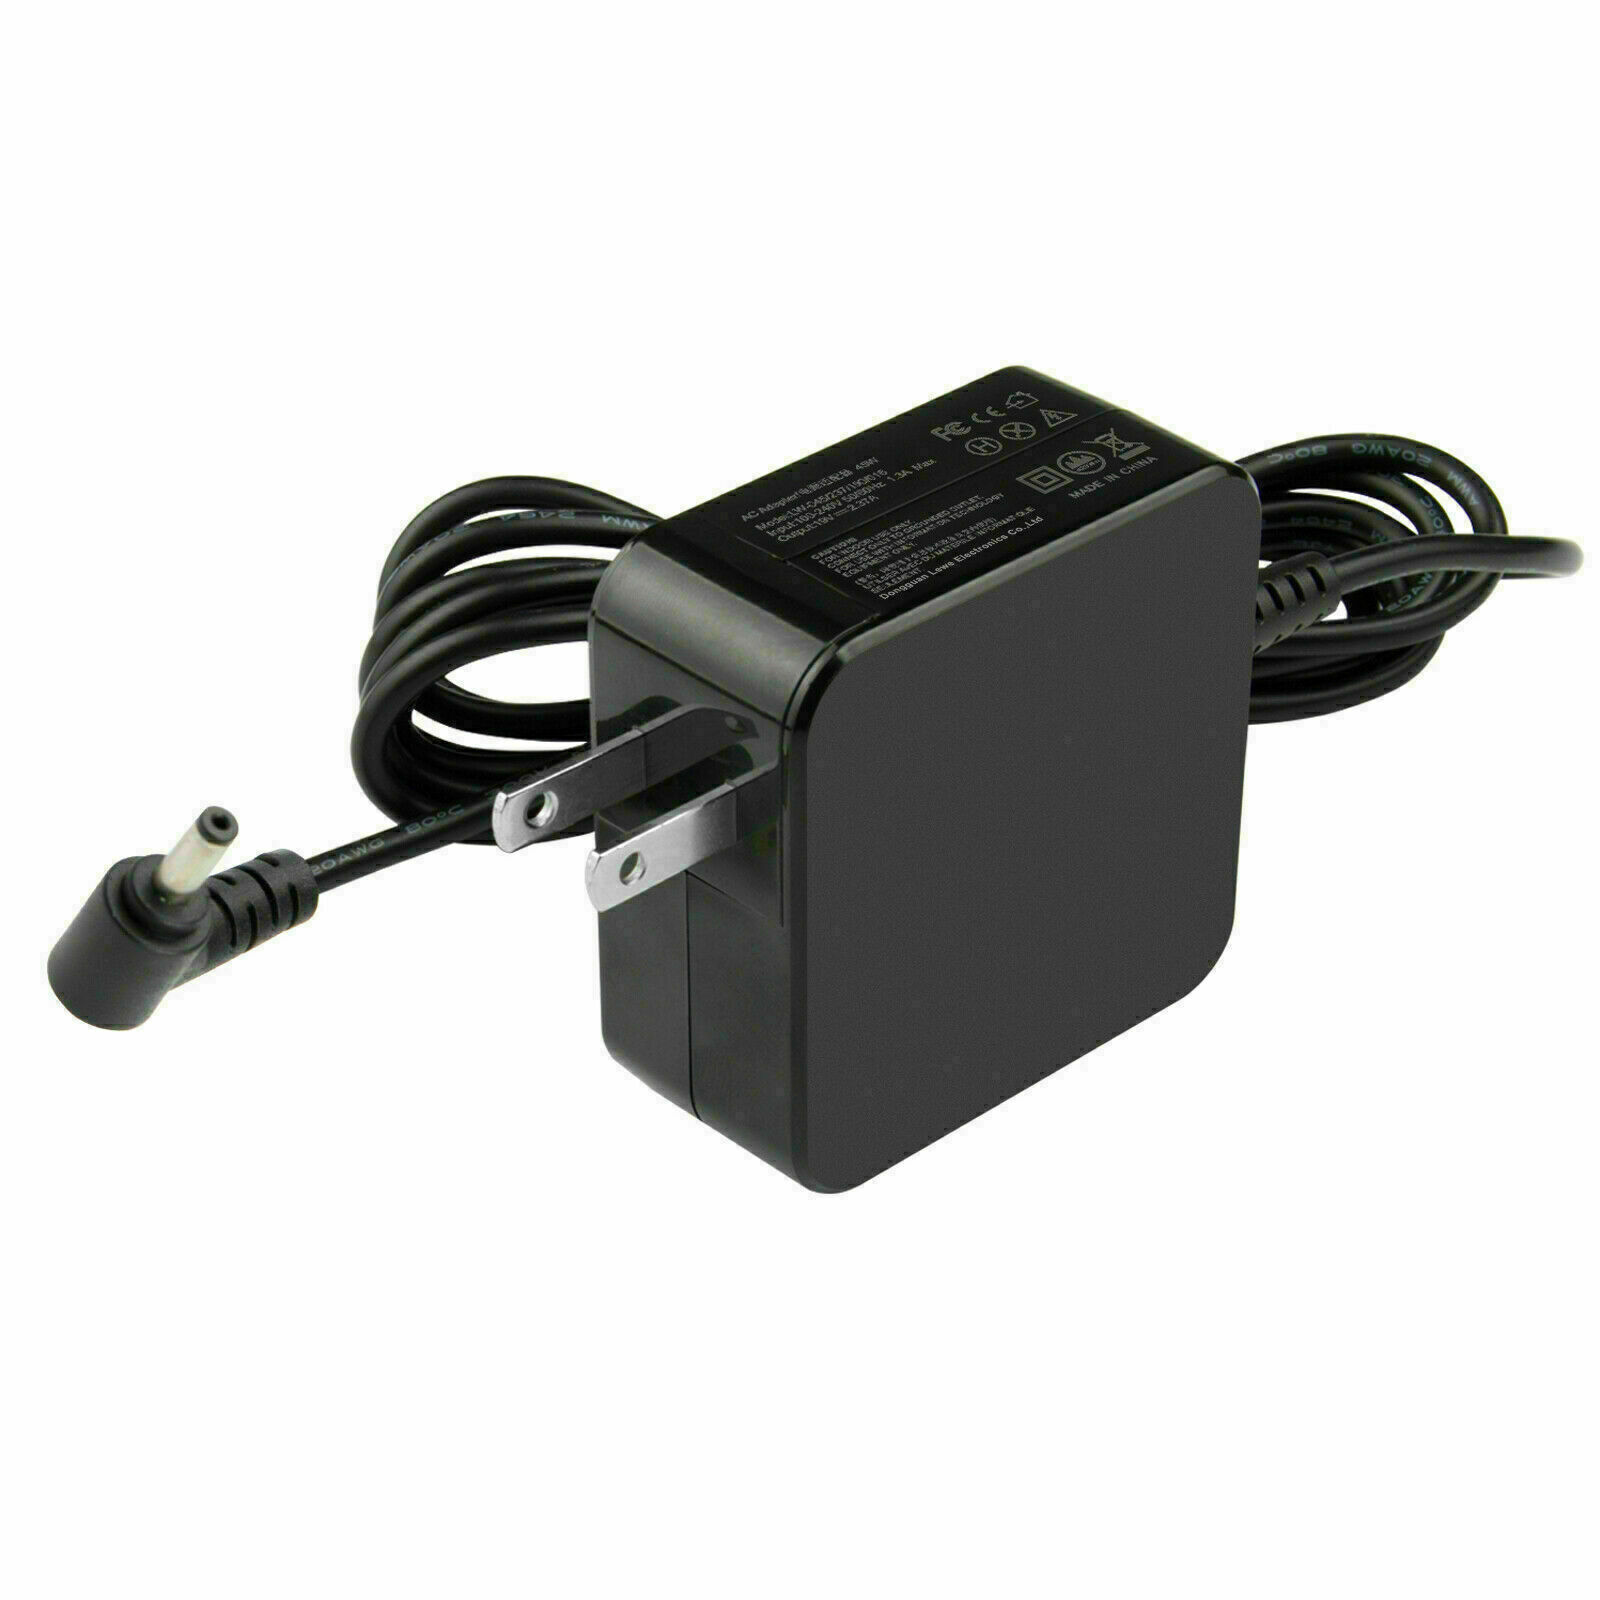 New For Asus Laptop Charger AC Adapter ADP-45BW B 19V 2.37A 45W Power Adapter